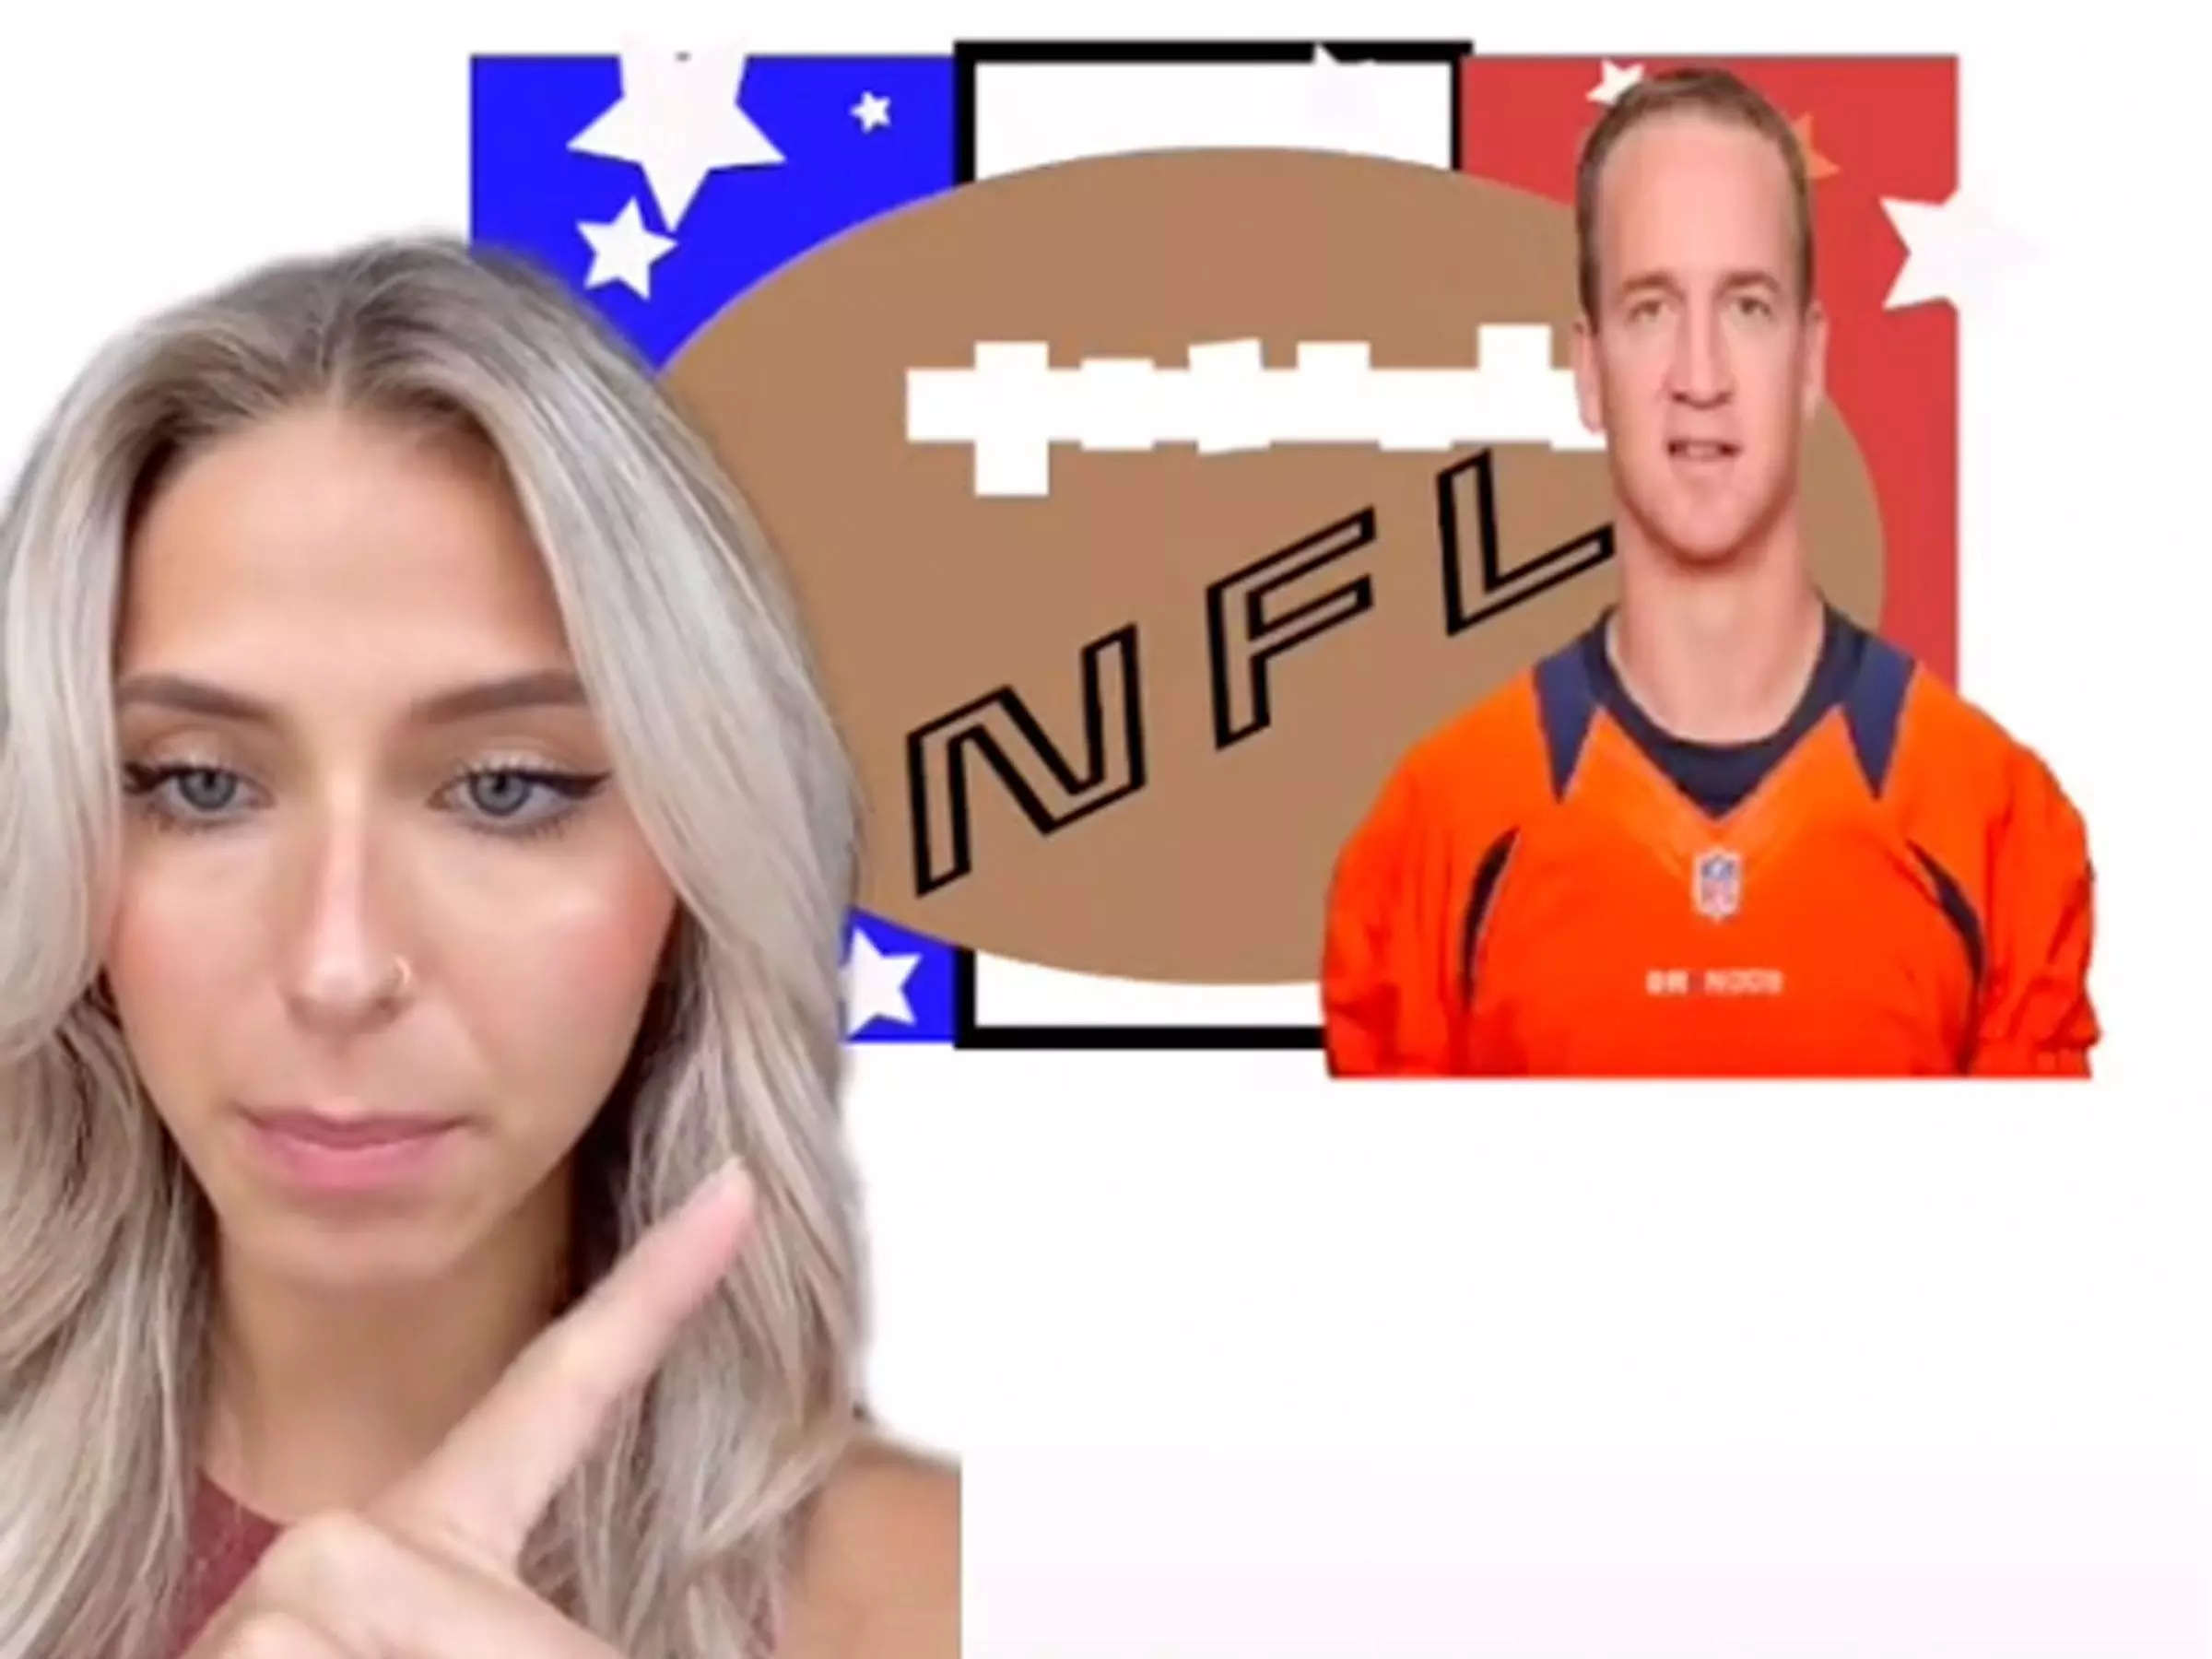 TikTok user Emily Zugay makes a mock-up of the NFL logo featuring "the president of the football in America."